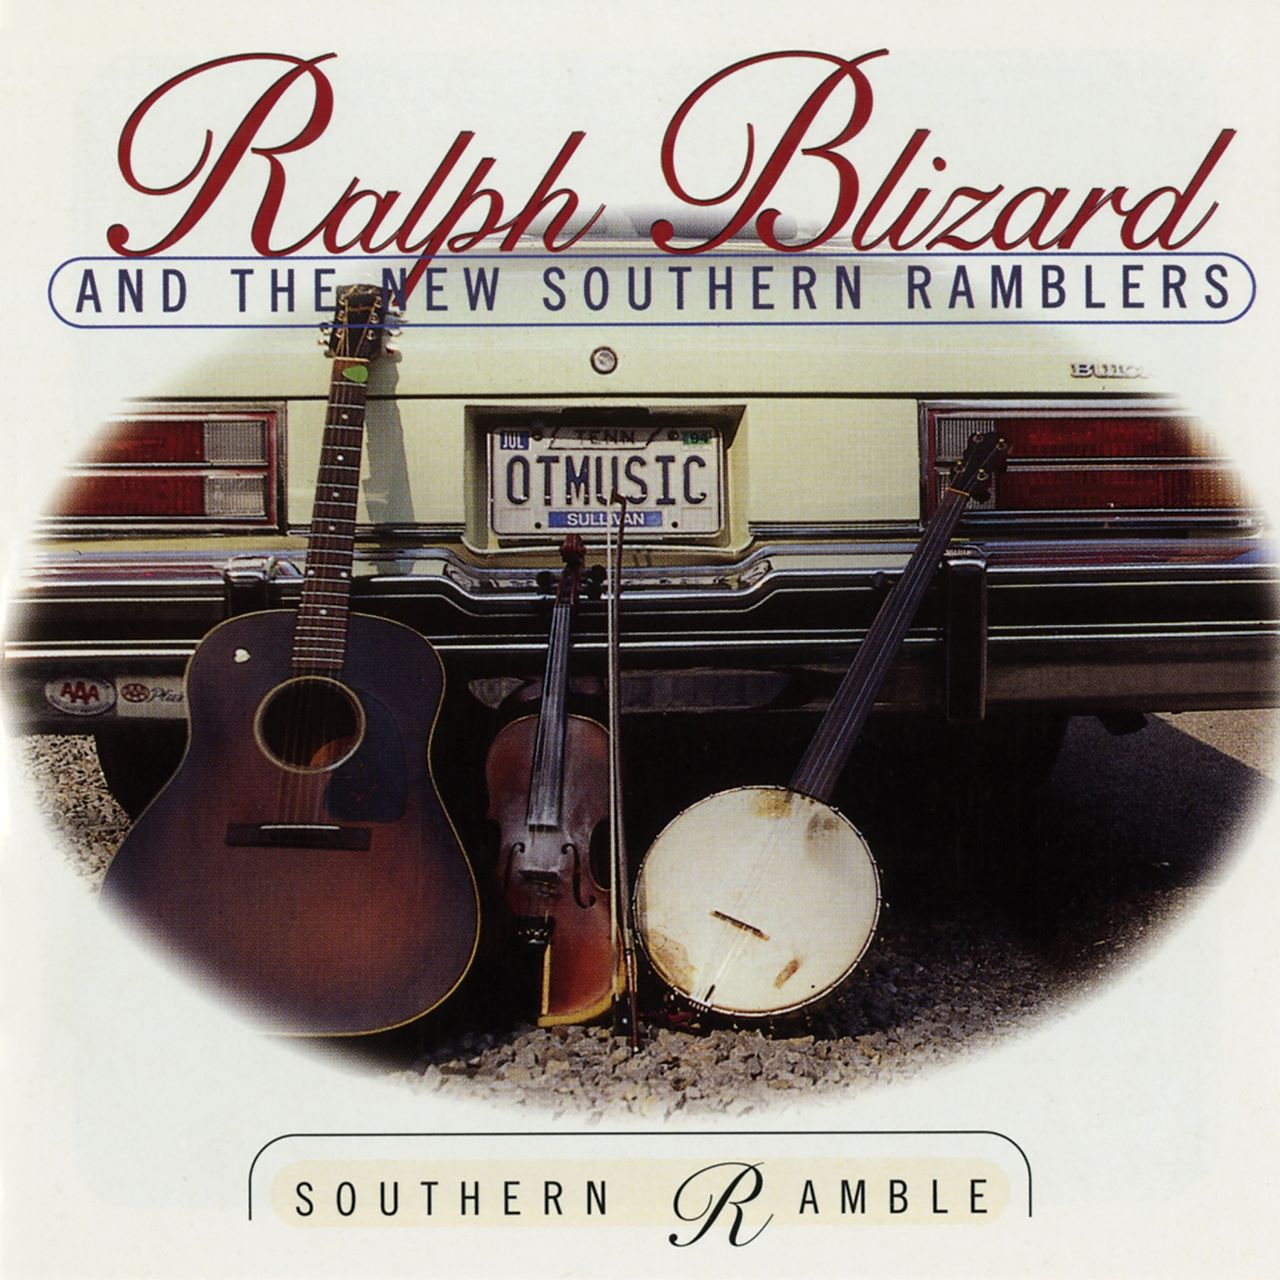 Ralph Blizard And The New Southern Ramblers - Southern Ramble cover album